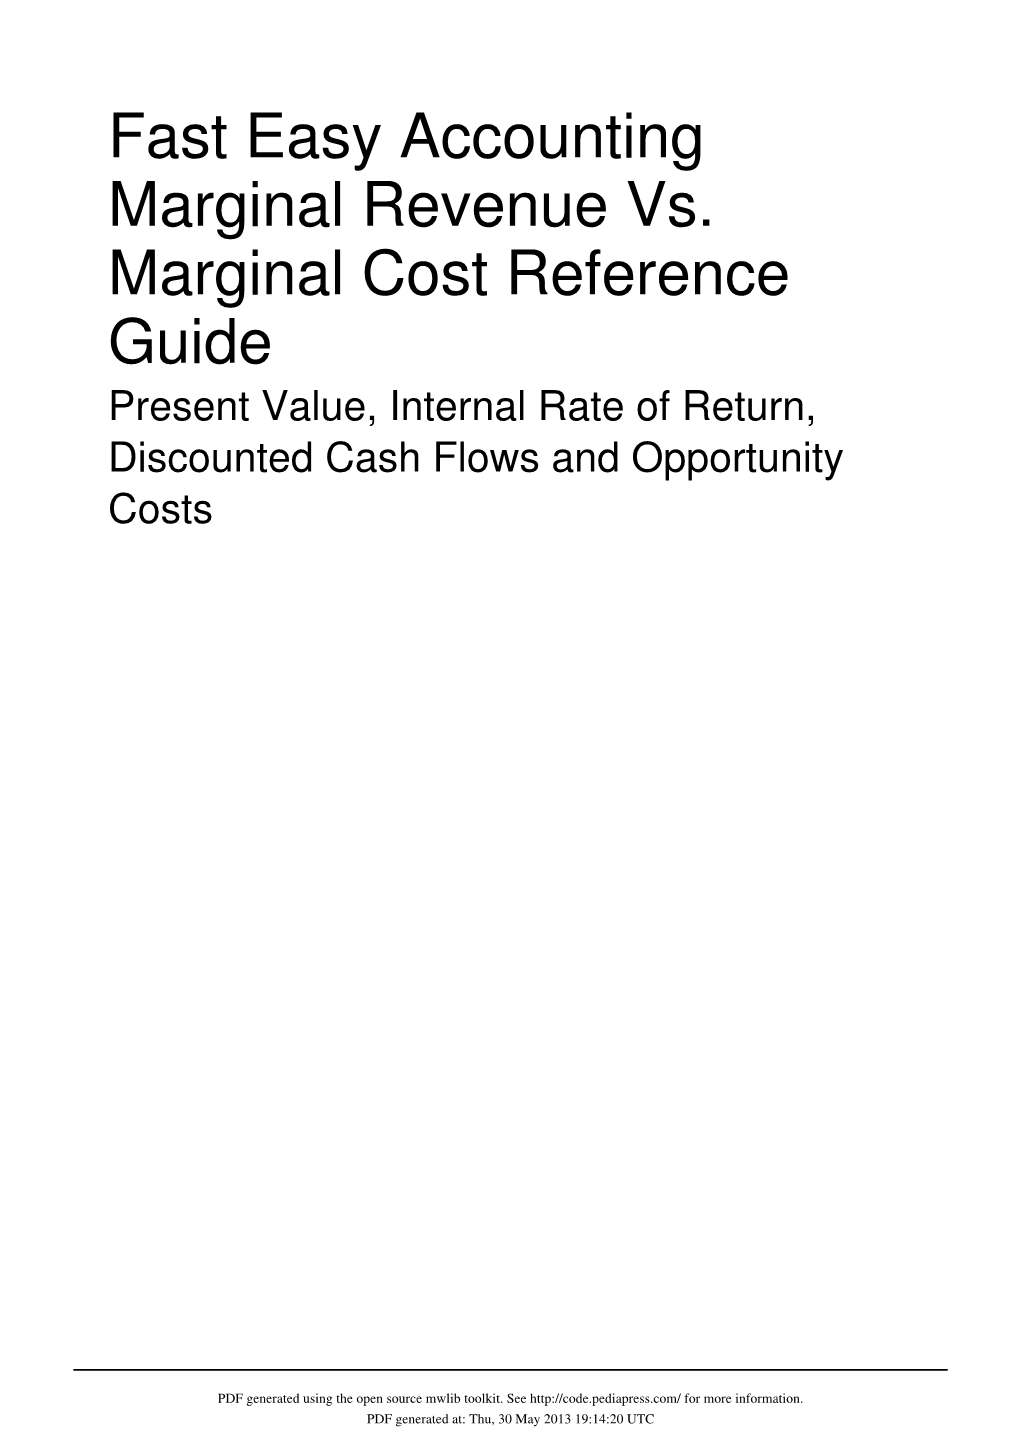 Fast Easy Accounting Marginal Revenue Vs. Marginal Cost Reference Guide Present Value, Internal Rate of Return, Discounted Cash Flows and Opportunity Costs